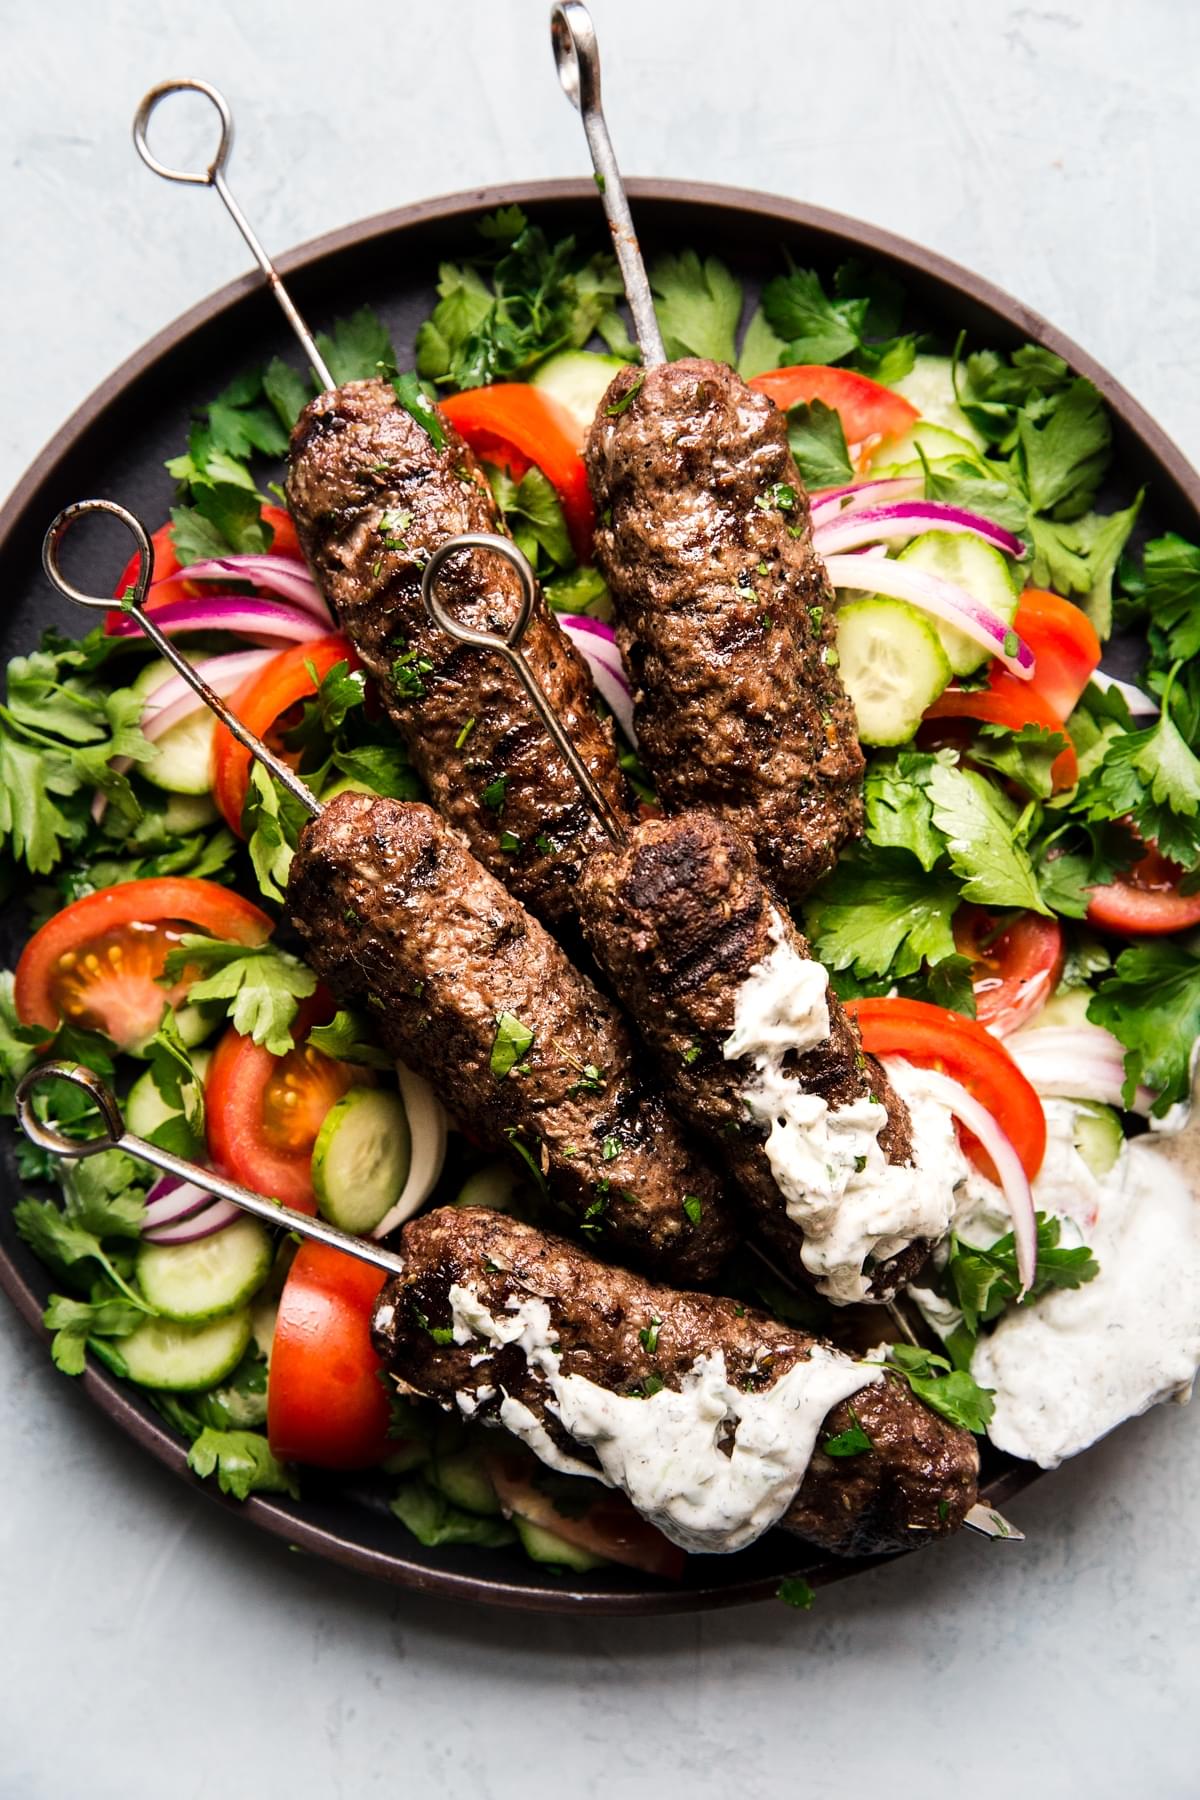 Beef Kofta Kababs with Tzatziki pita bread tomatoes on skewers on a plate